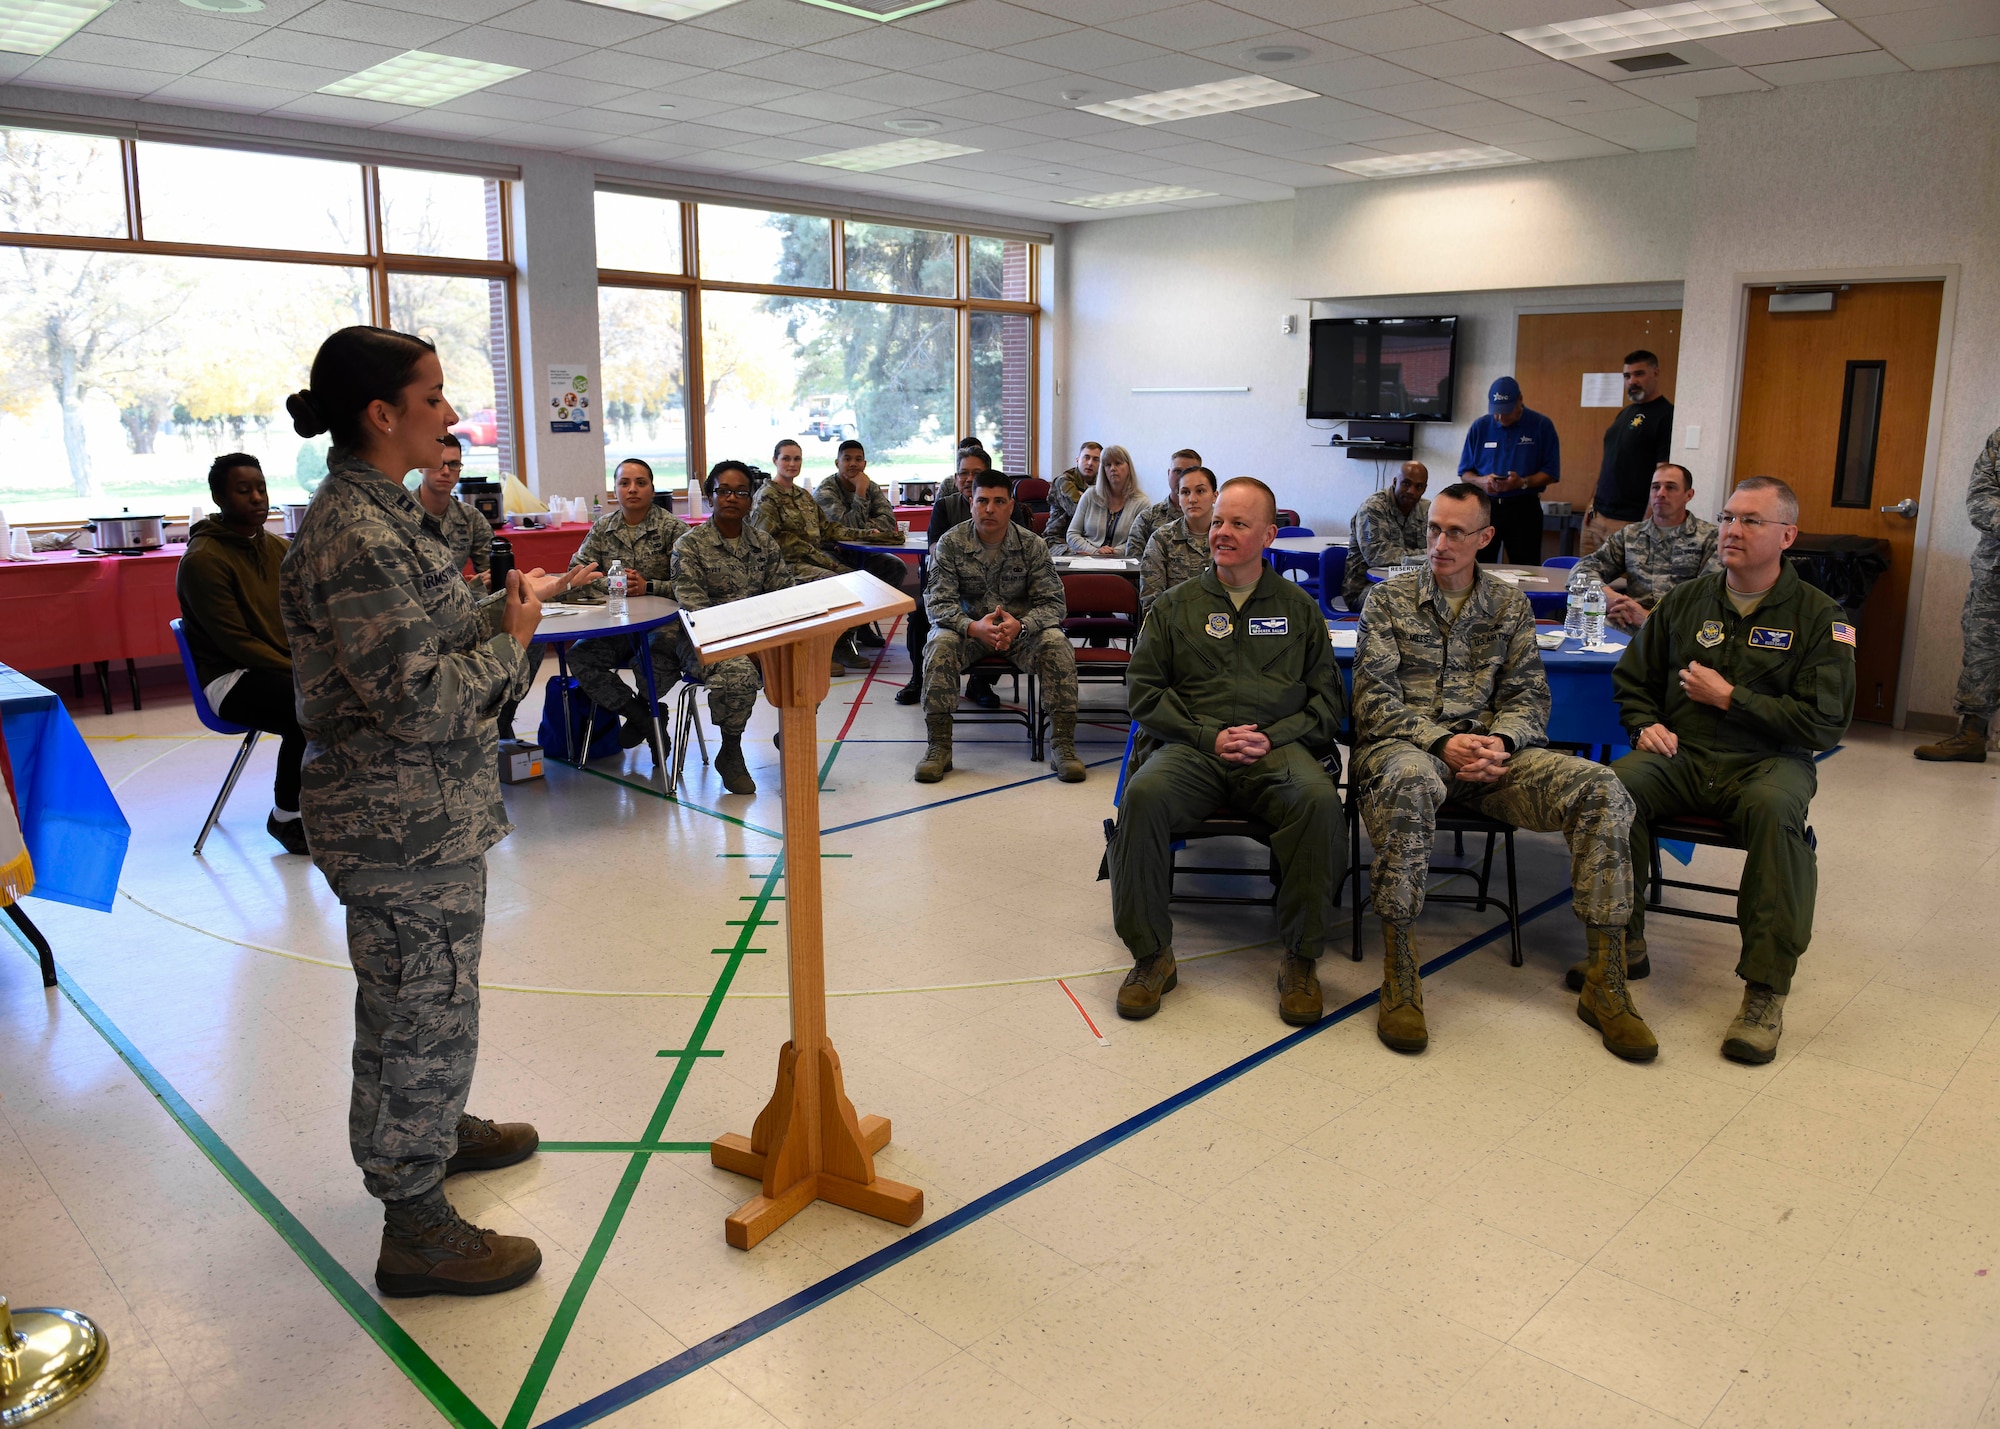 Capt. Alyssa Armstrong, 92nd Logistics Readiness Squadron Material Management Flight commander, gives opening remarks for a "Chili Cook-Off" event promoting the 2018 Combined Federal Campaign Kick-Off at Fairchild Air Force Base, Washington, Oct. 24, 2018.  Fairchild's 92nd Air Refueling Wing CFC representatives hosted a "Chili Cook-Off" event, allowing Airmen to engage with local charities and nonprofit organizations. (U.S. Air Force photo/Airman 1st Class Lawrence Sena)